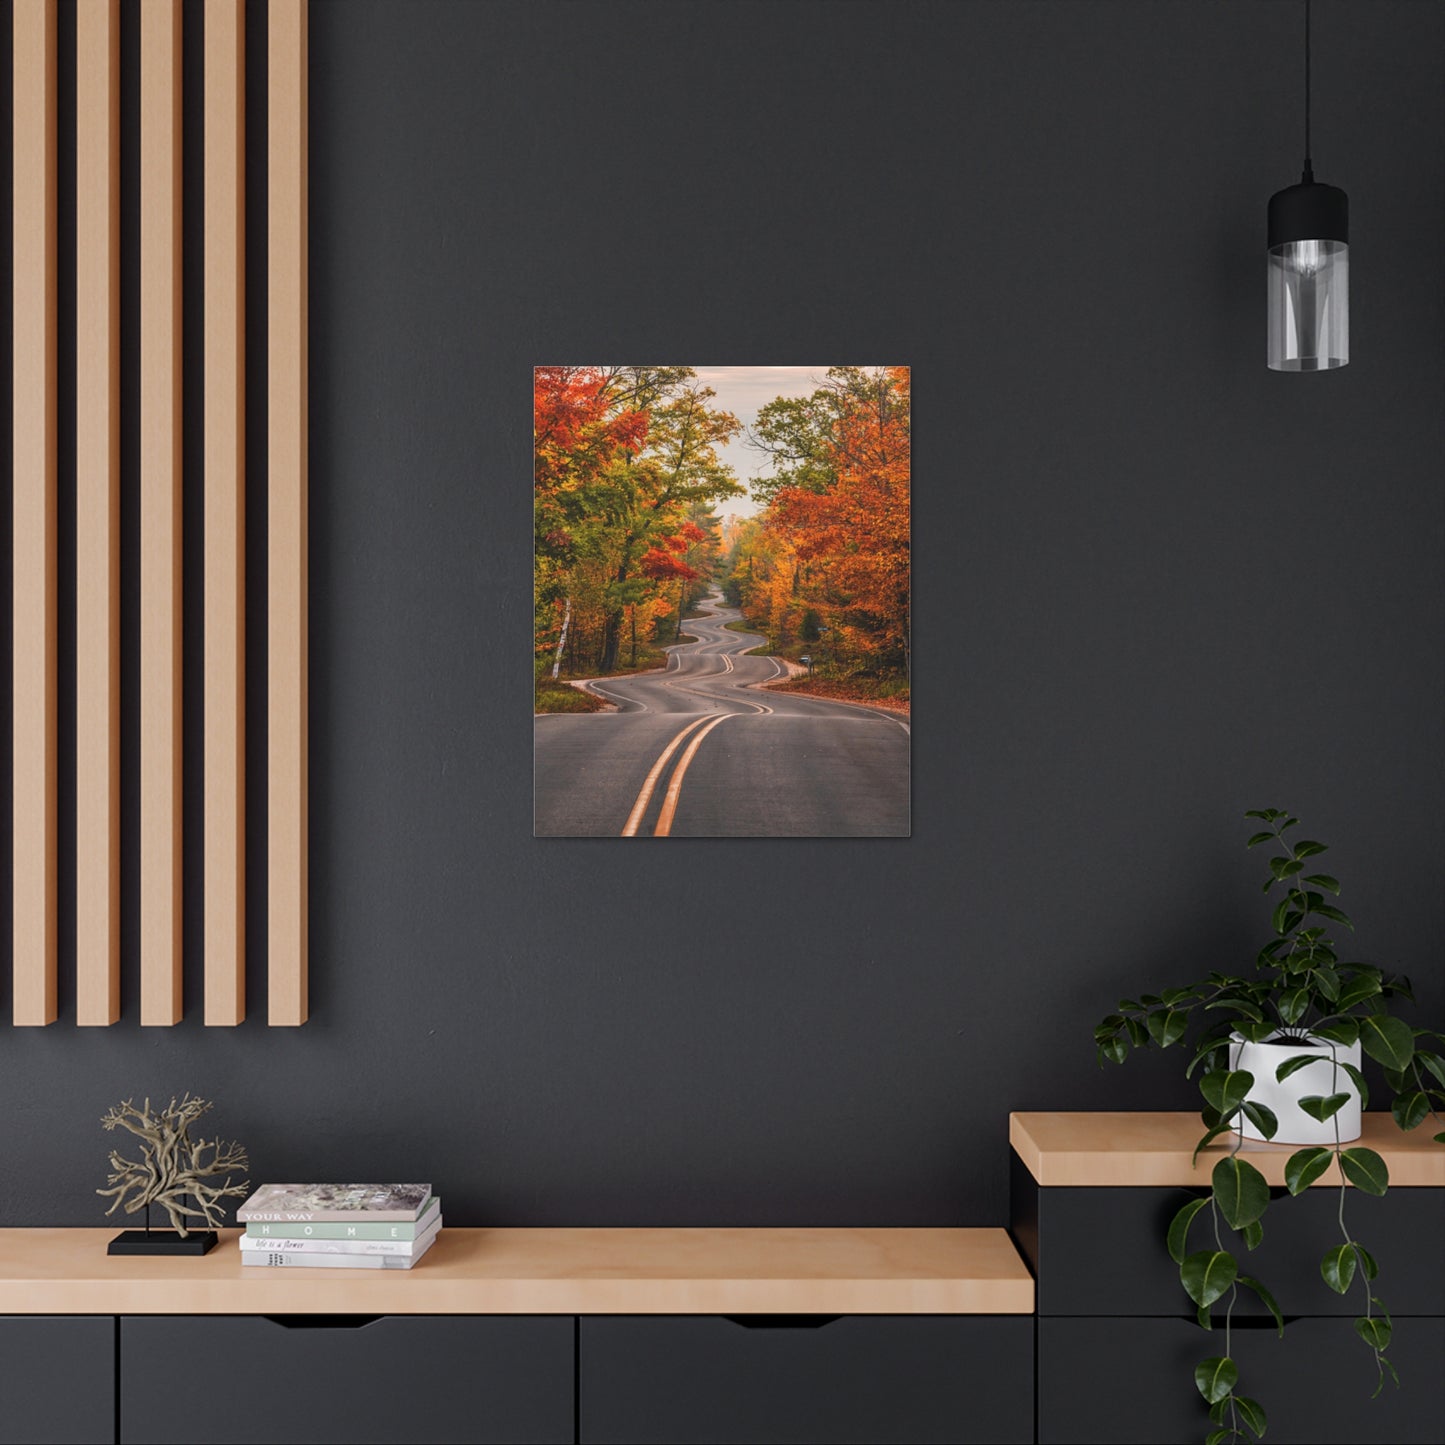 Autumn Foliage in Door County, Wisconsin - Canvas Wall Print (Free Shipping)